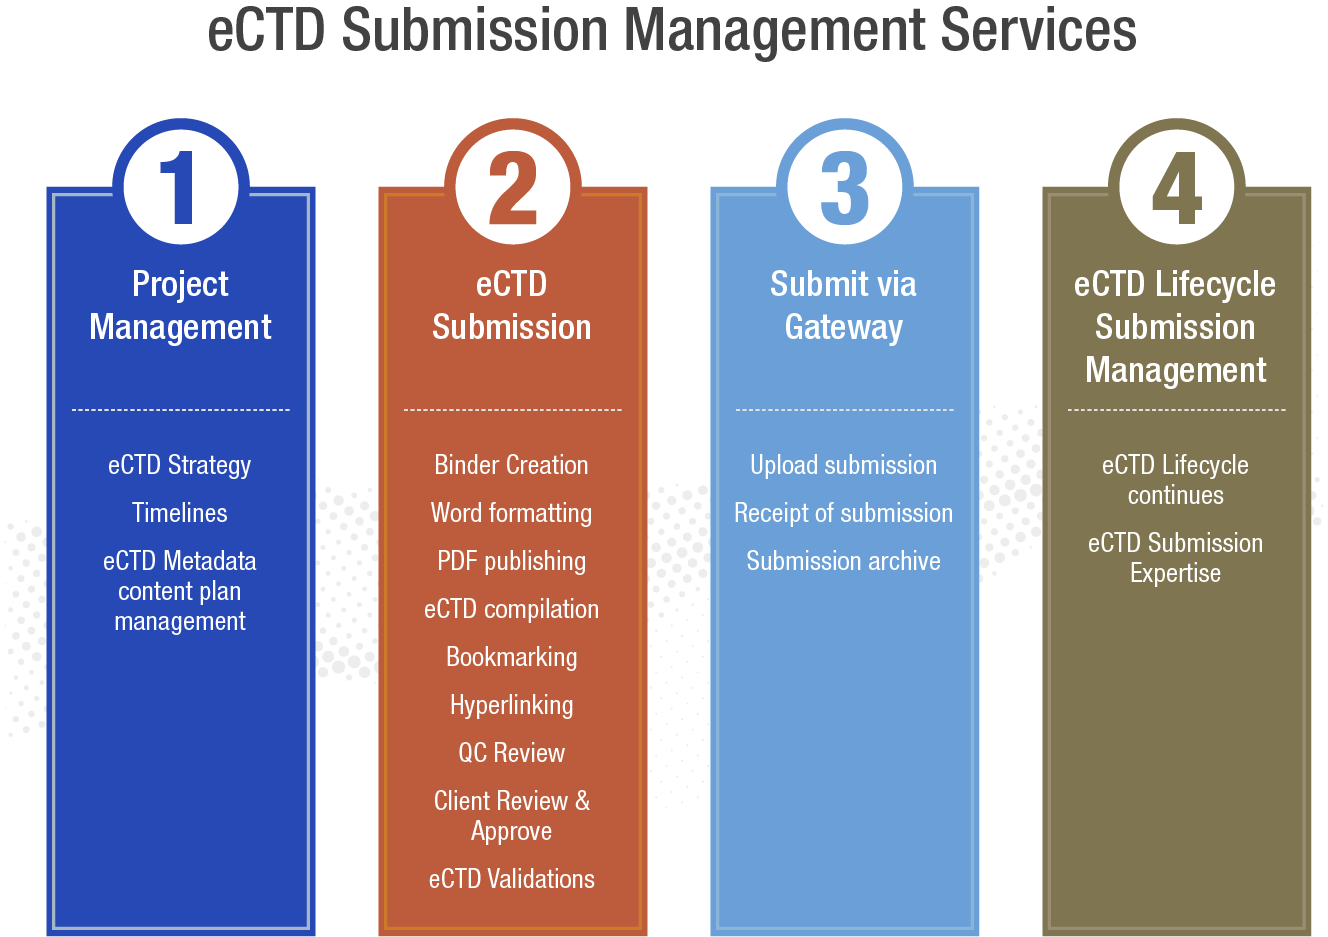 eCTD Submission Management Services